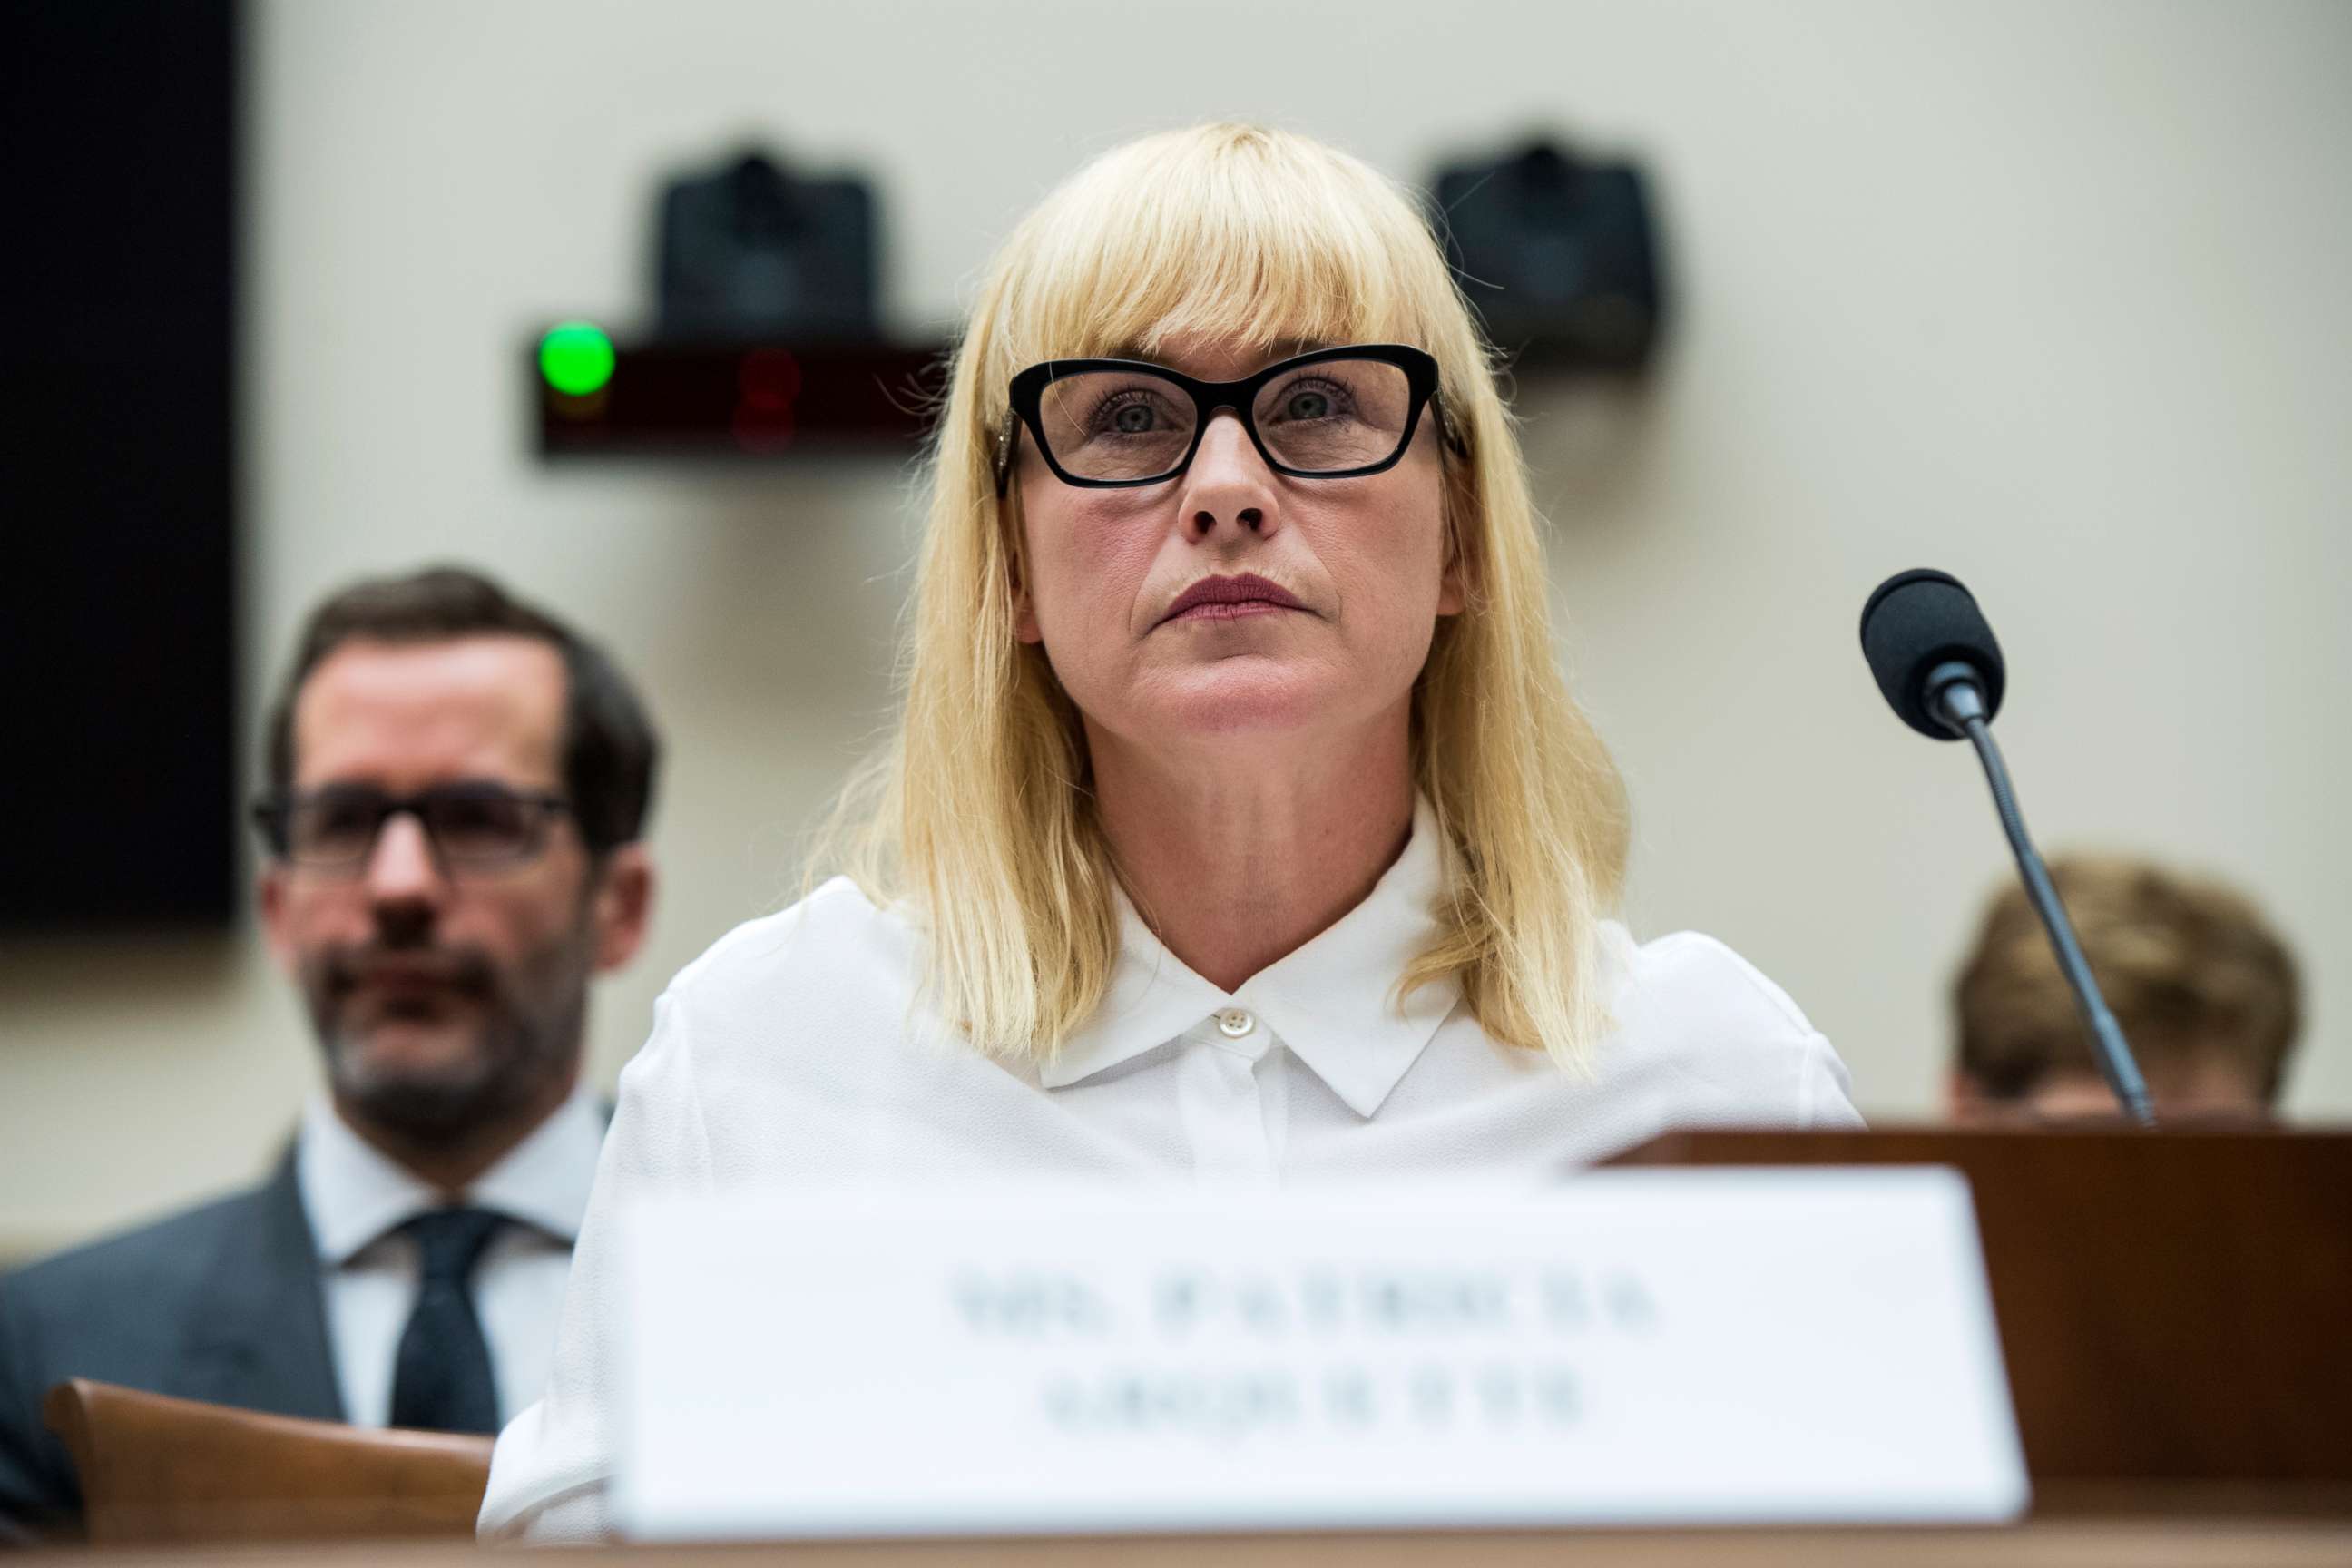 PHOTO: Patricia Arquette testifies during the House Judiciary Constitution, Civil Rights and Civil Liberties Subcommittee hearing on the Equal Rights Amendment, April 30, 2019.